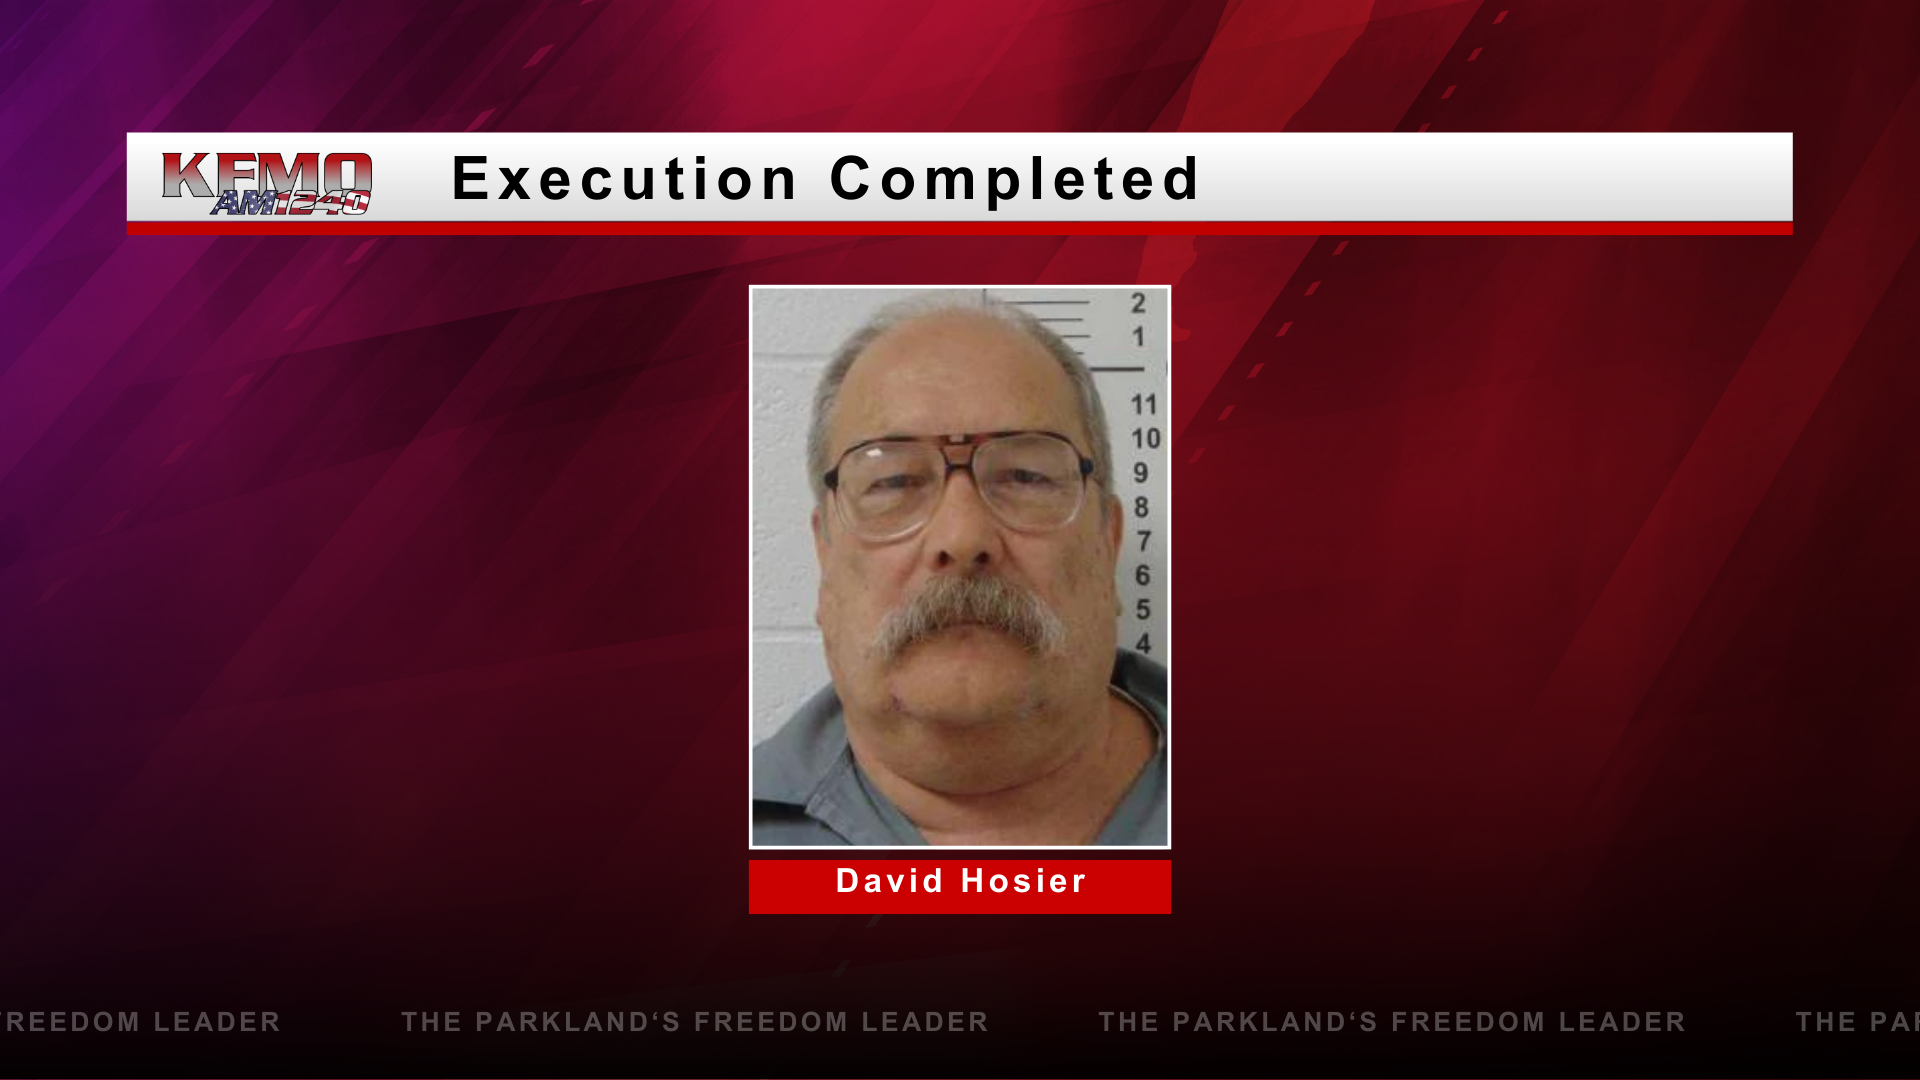 Execution of David Hosier Completed